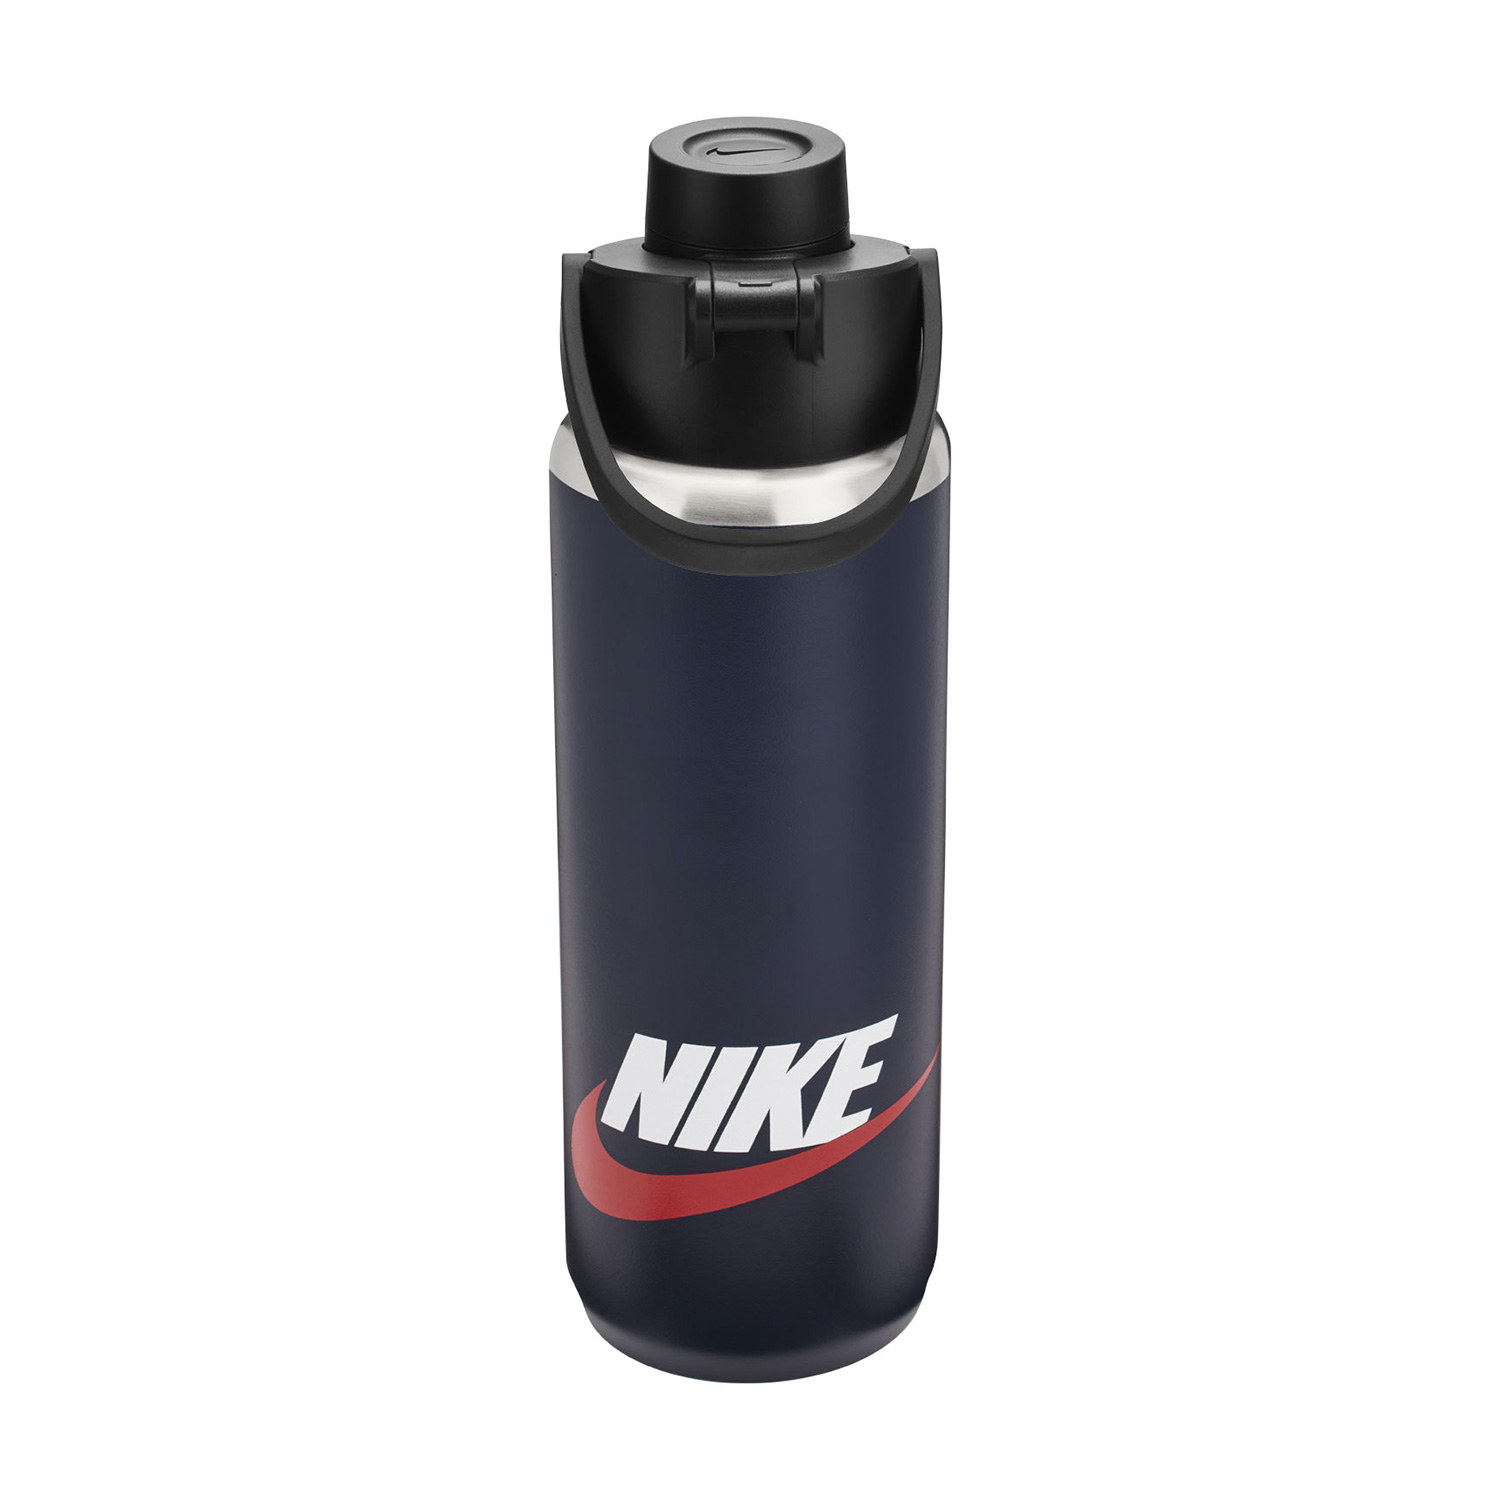 Nike Recharge Graphic Water Bottle - Obsidian/Black/Sail